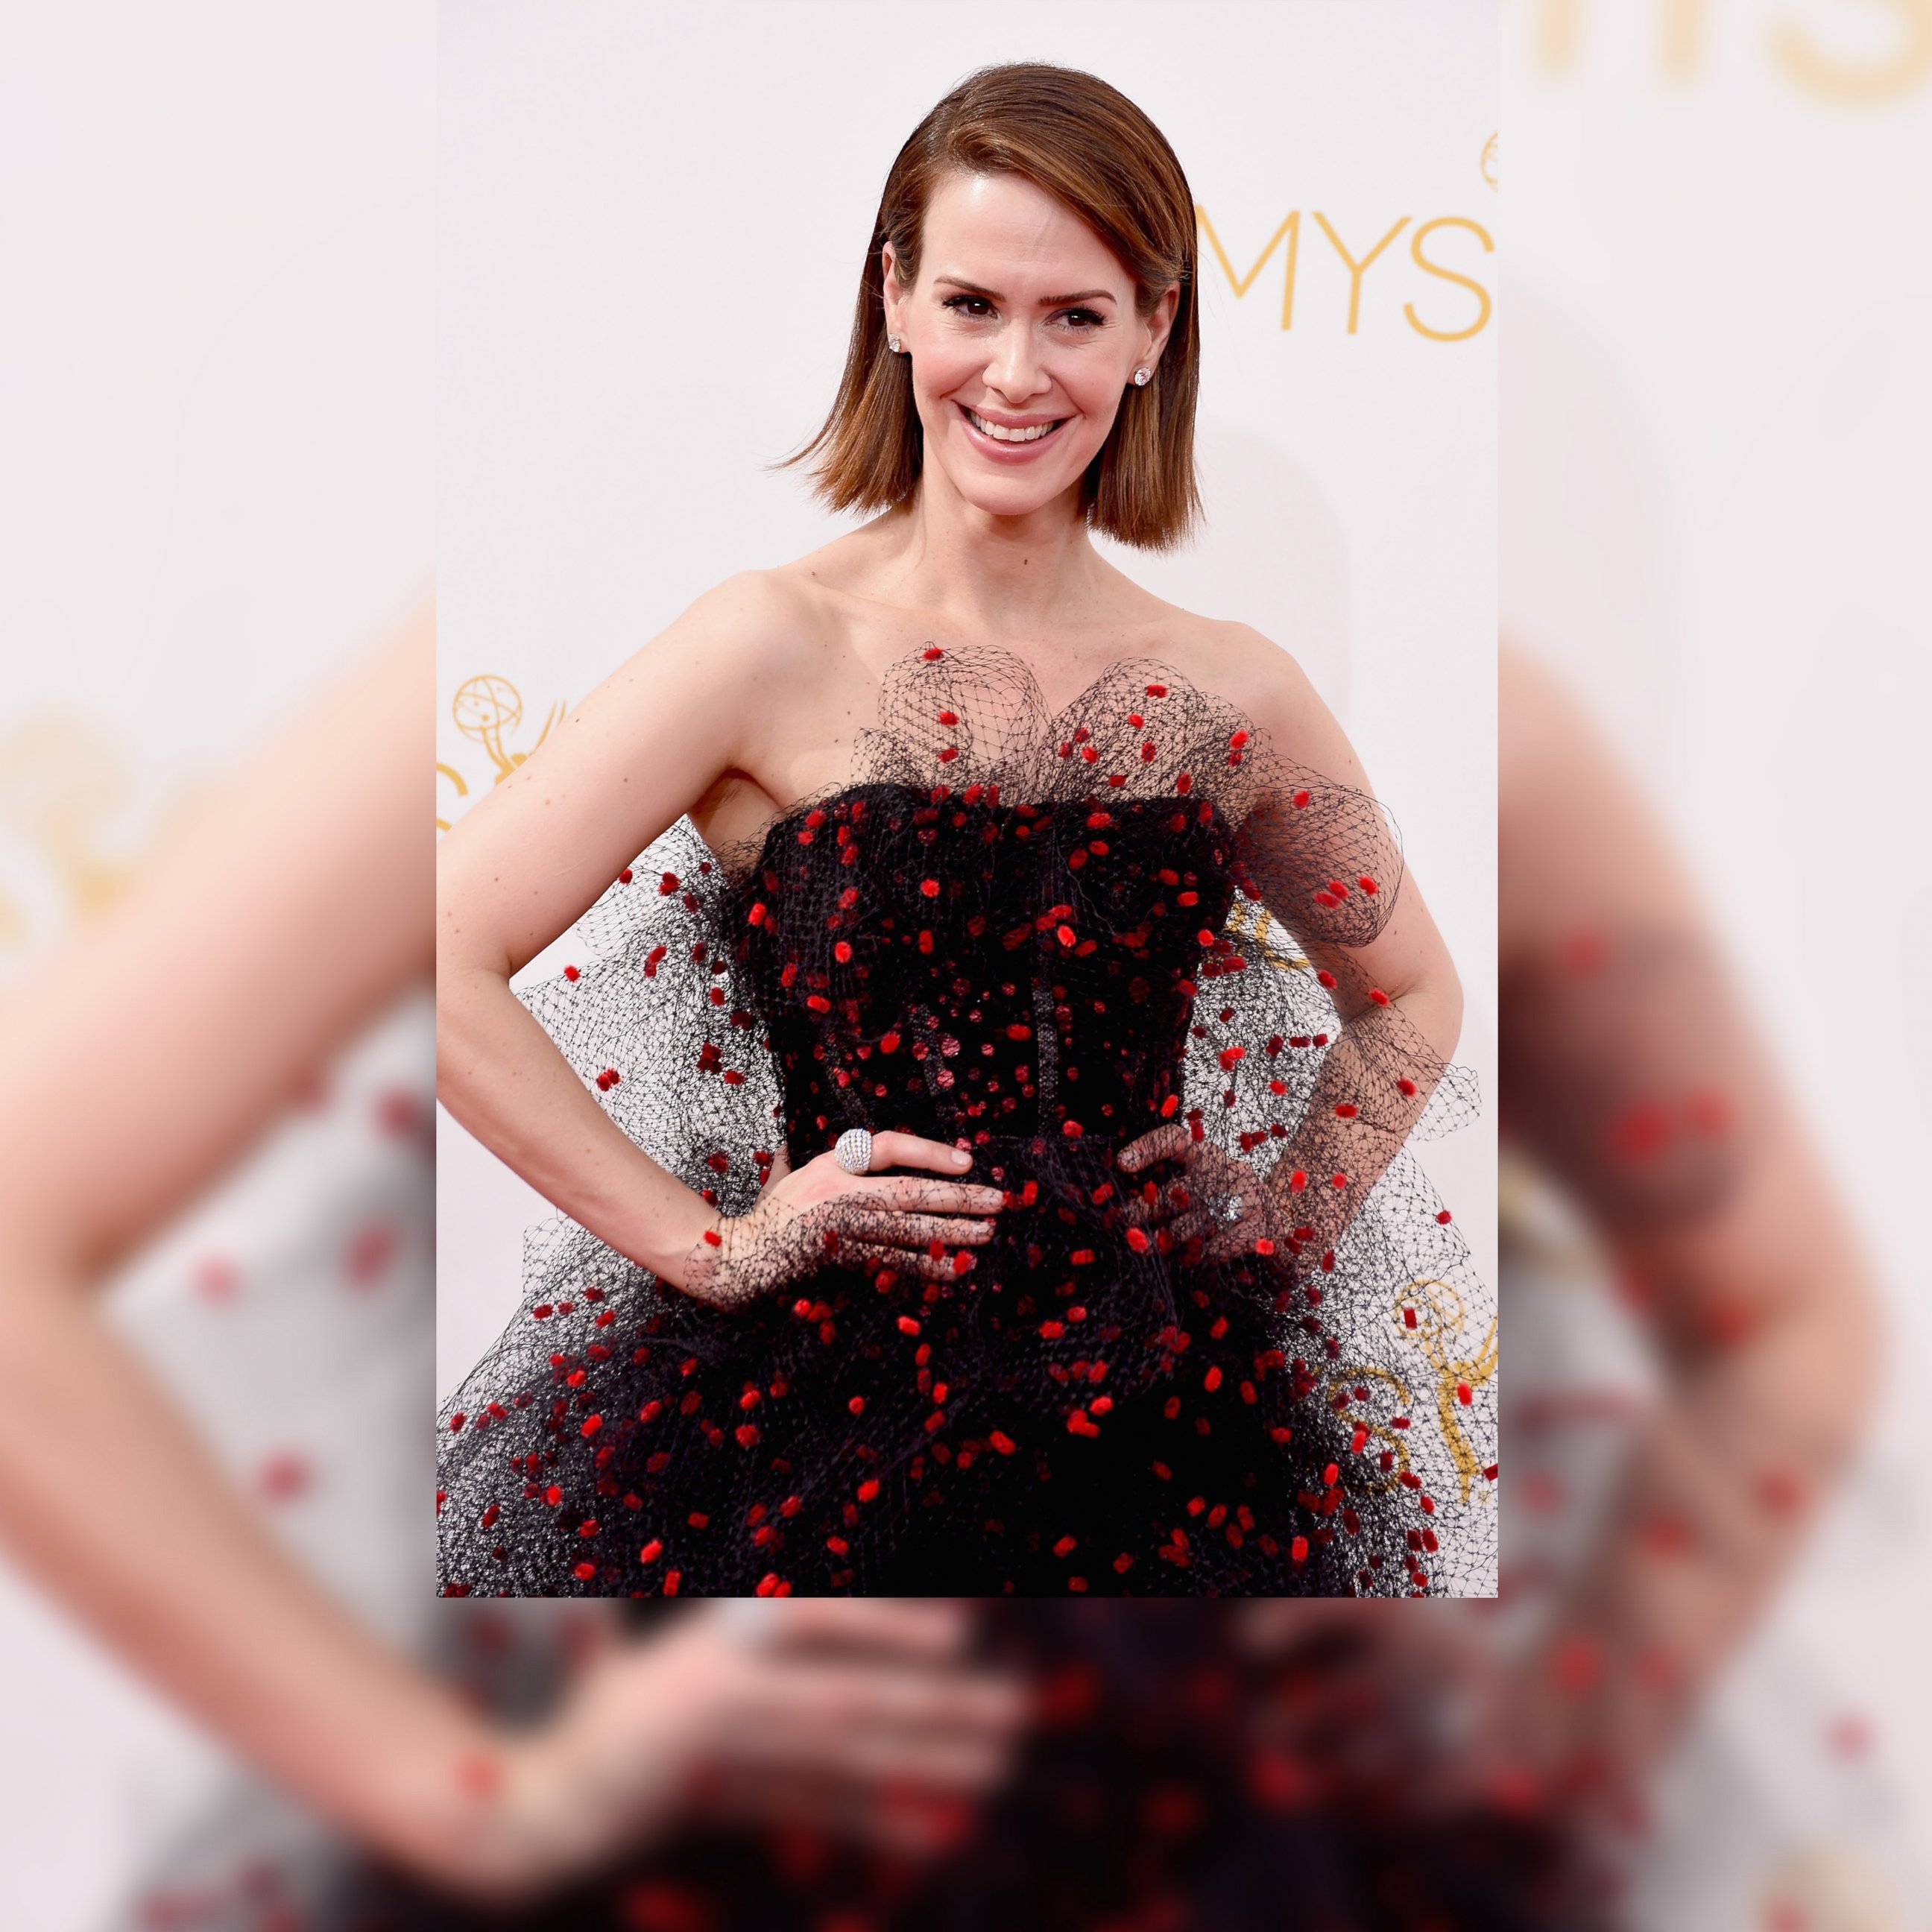 PHOTO: Actress Sarah Paulson attends the 66th Annual Primetime Emmy Awards held at Nokia Theatre L.A. Live on August 25, 2014 in Los Angeles, Calif.